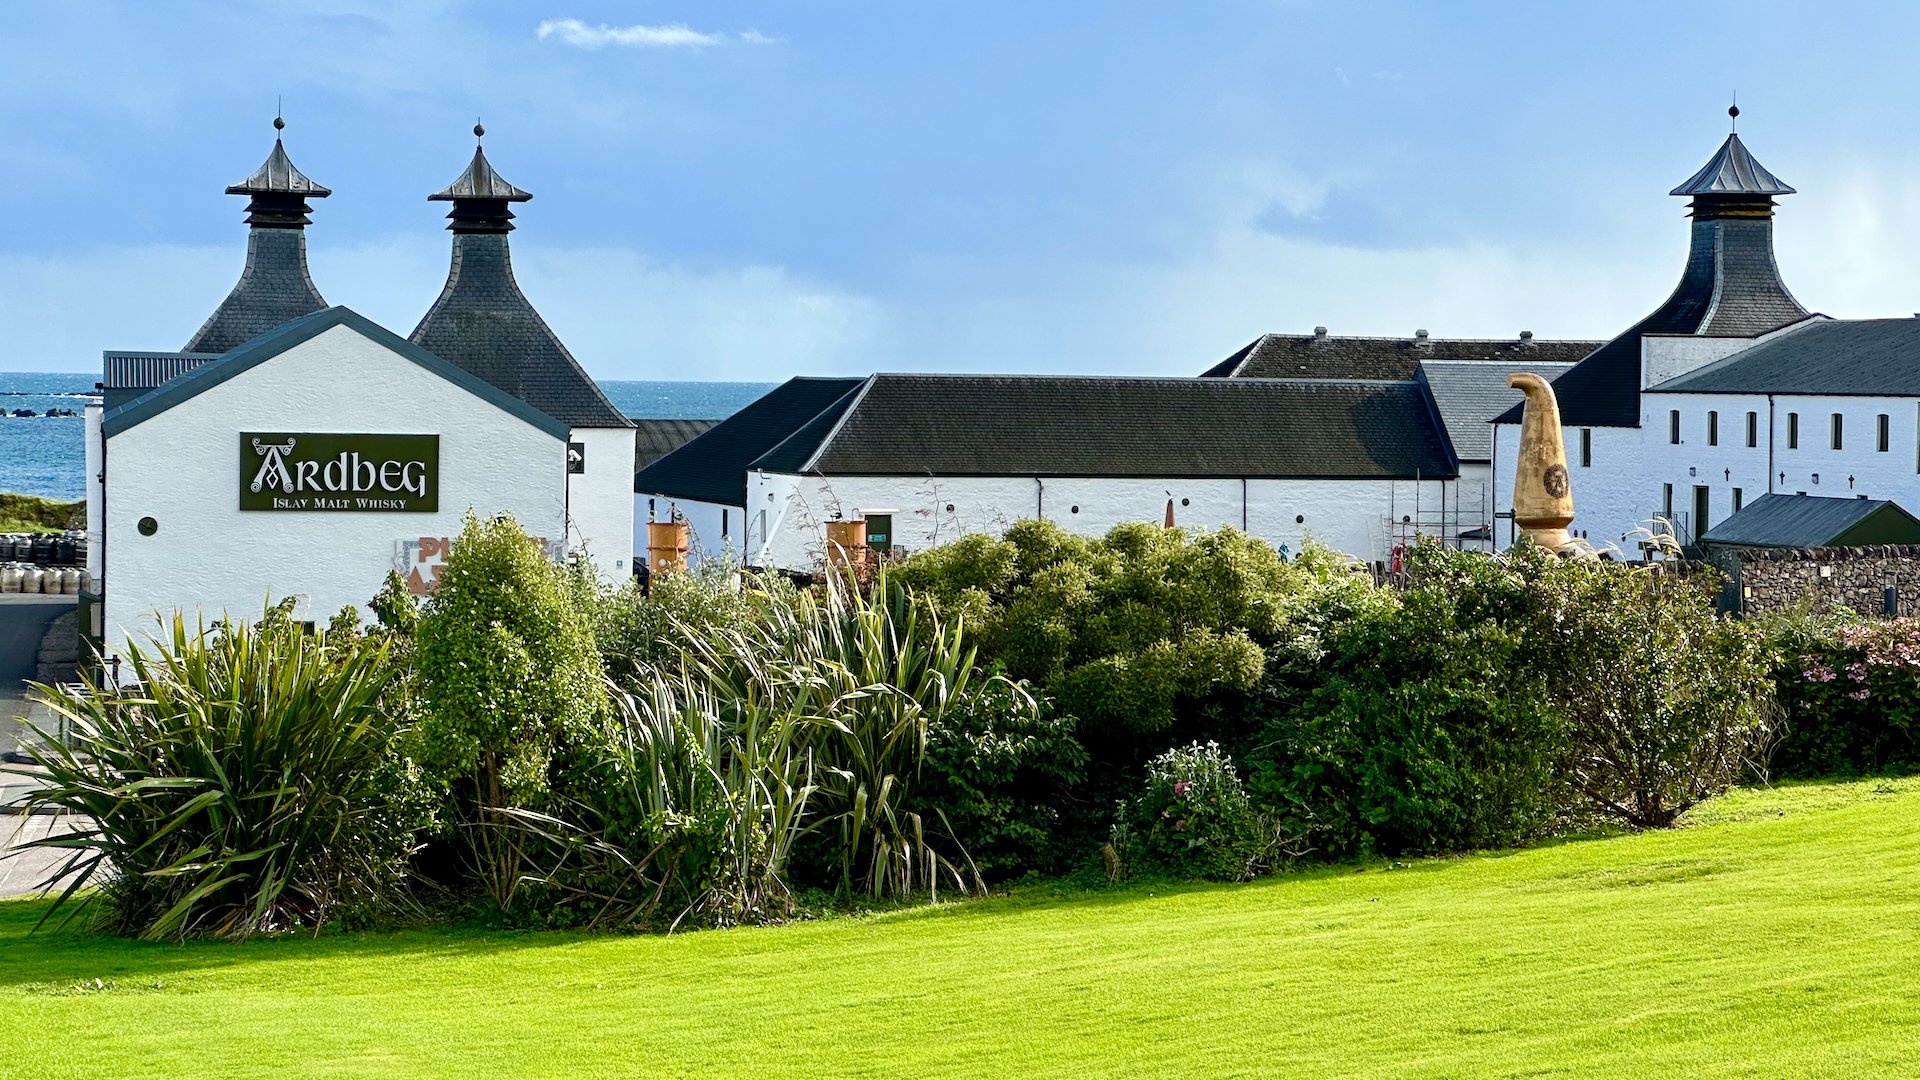  The Ardbeg facility really is quite beautiful.  